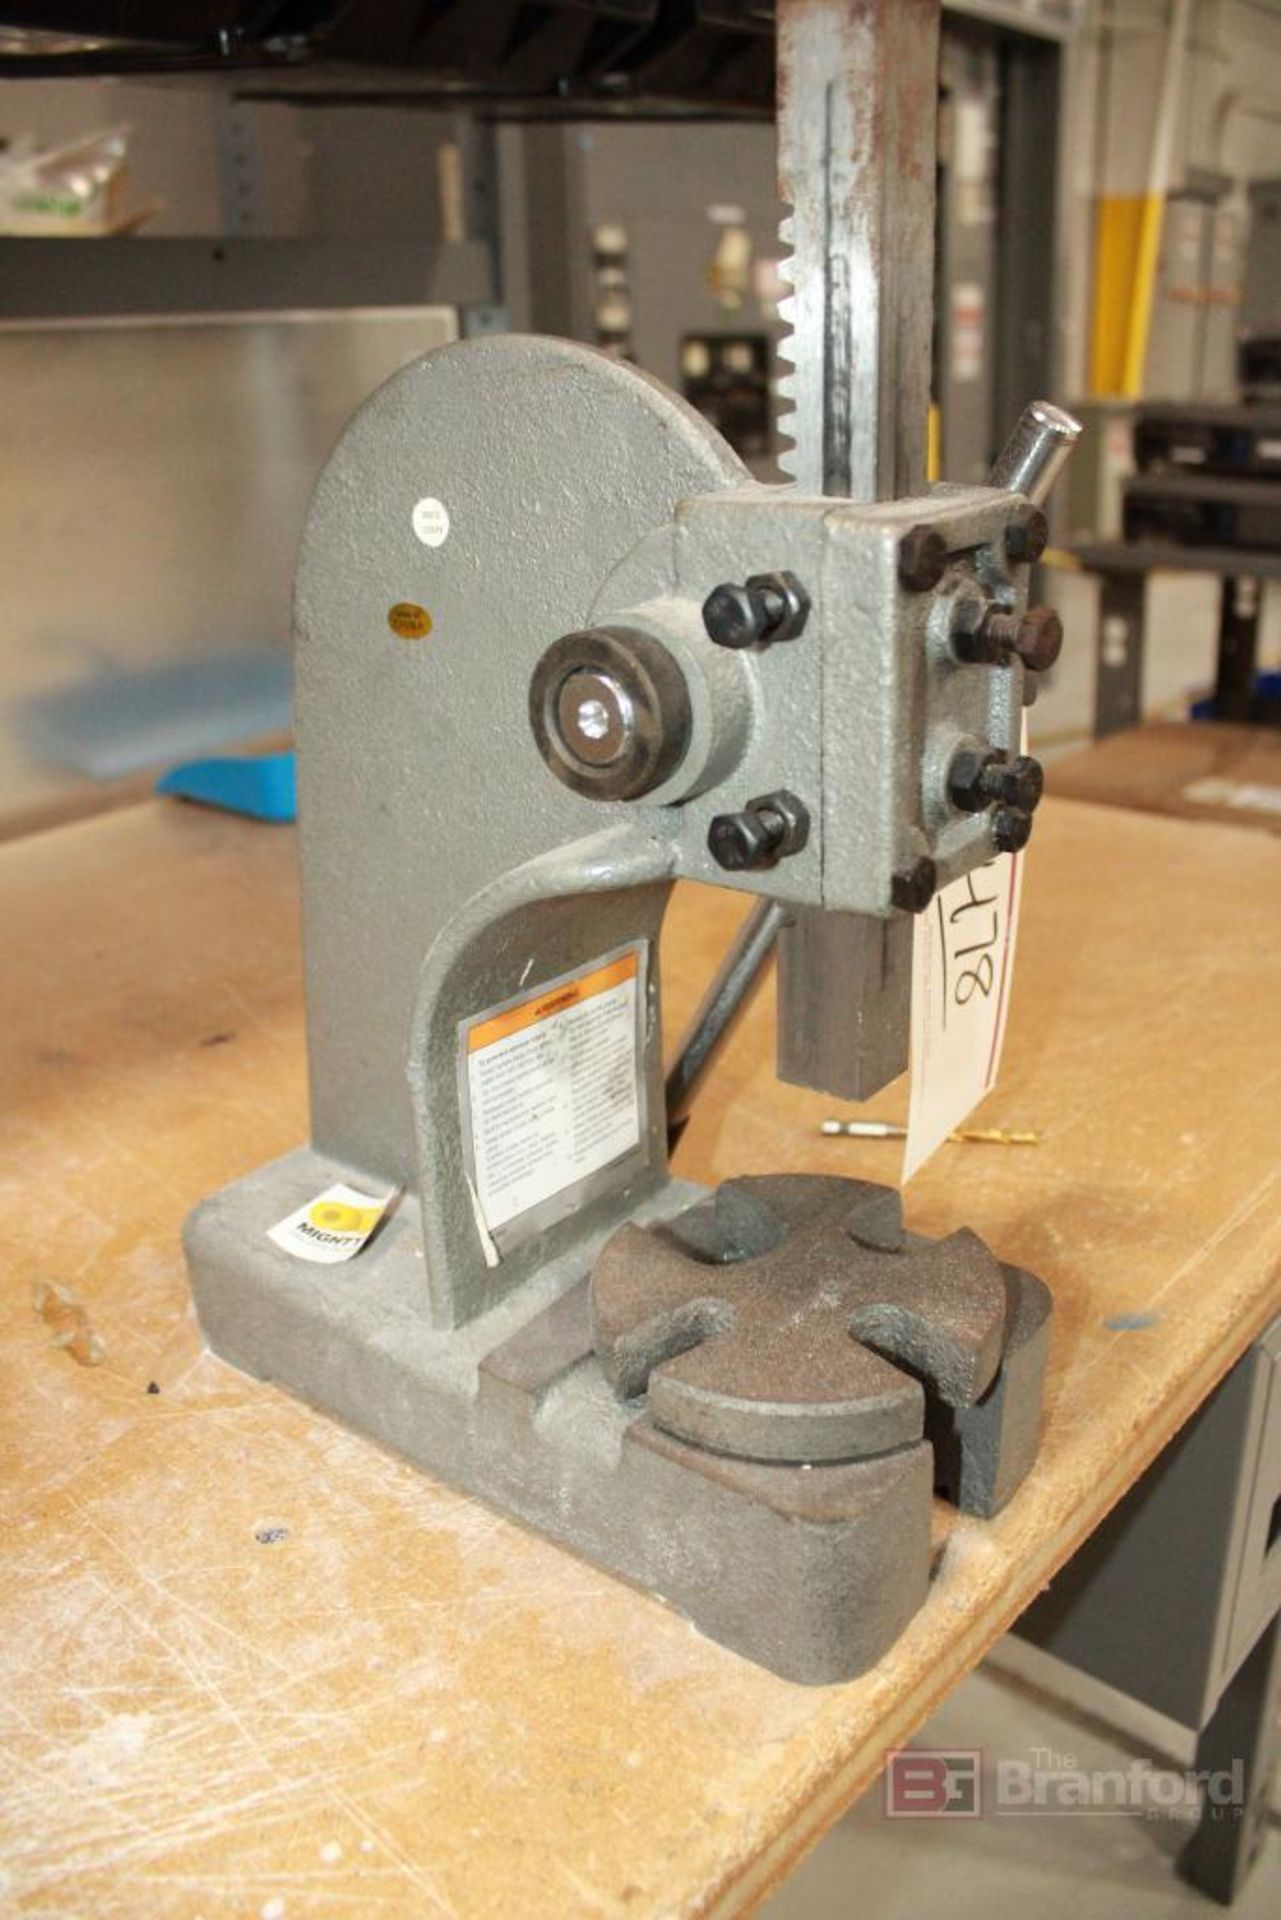 Shop Table with Machinery - Image 5 of 6